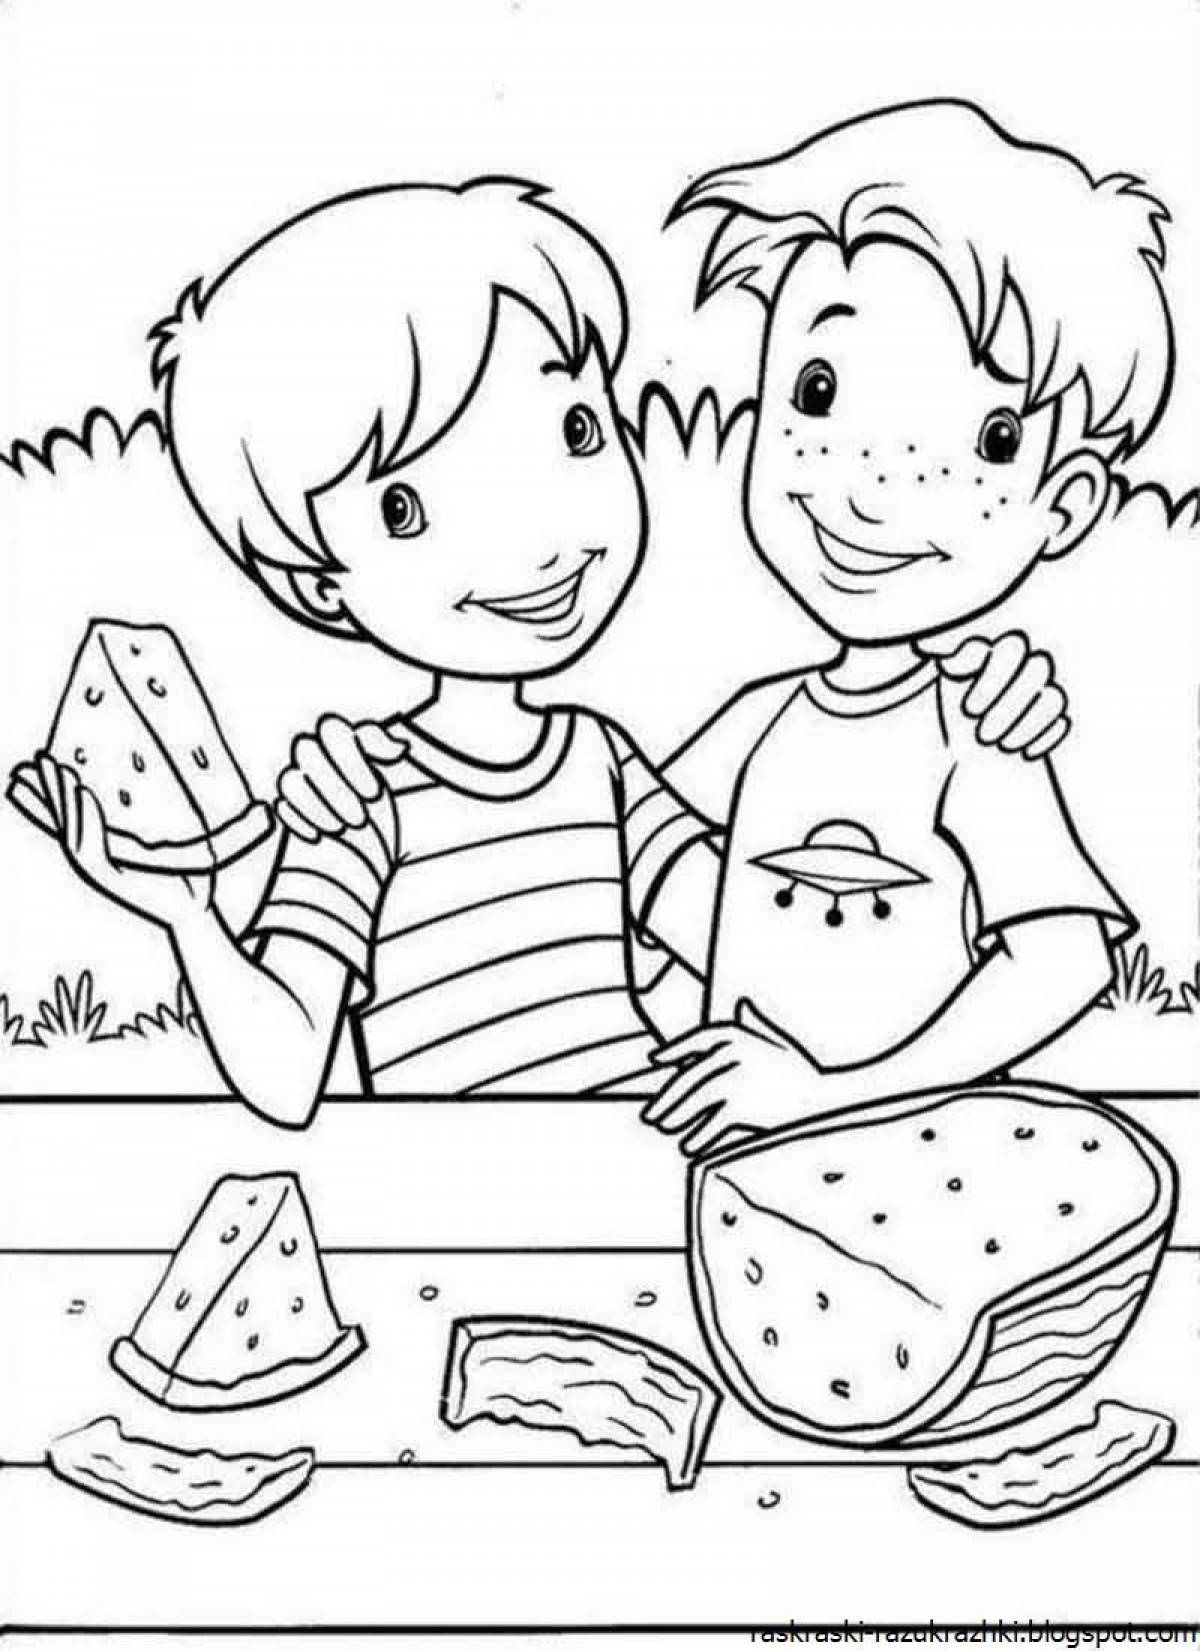 Colourful-joyful friends coloring page